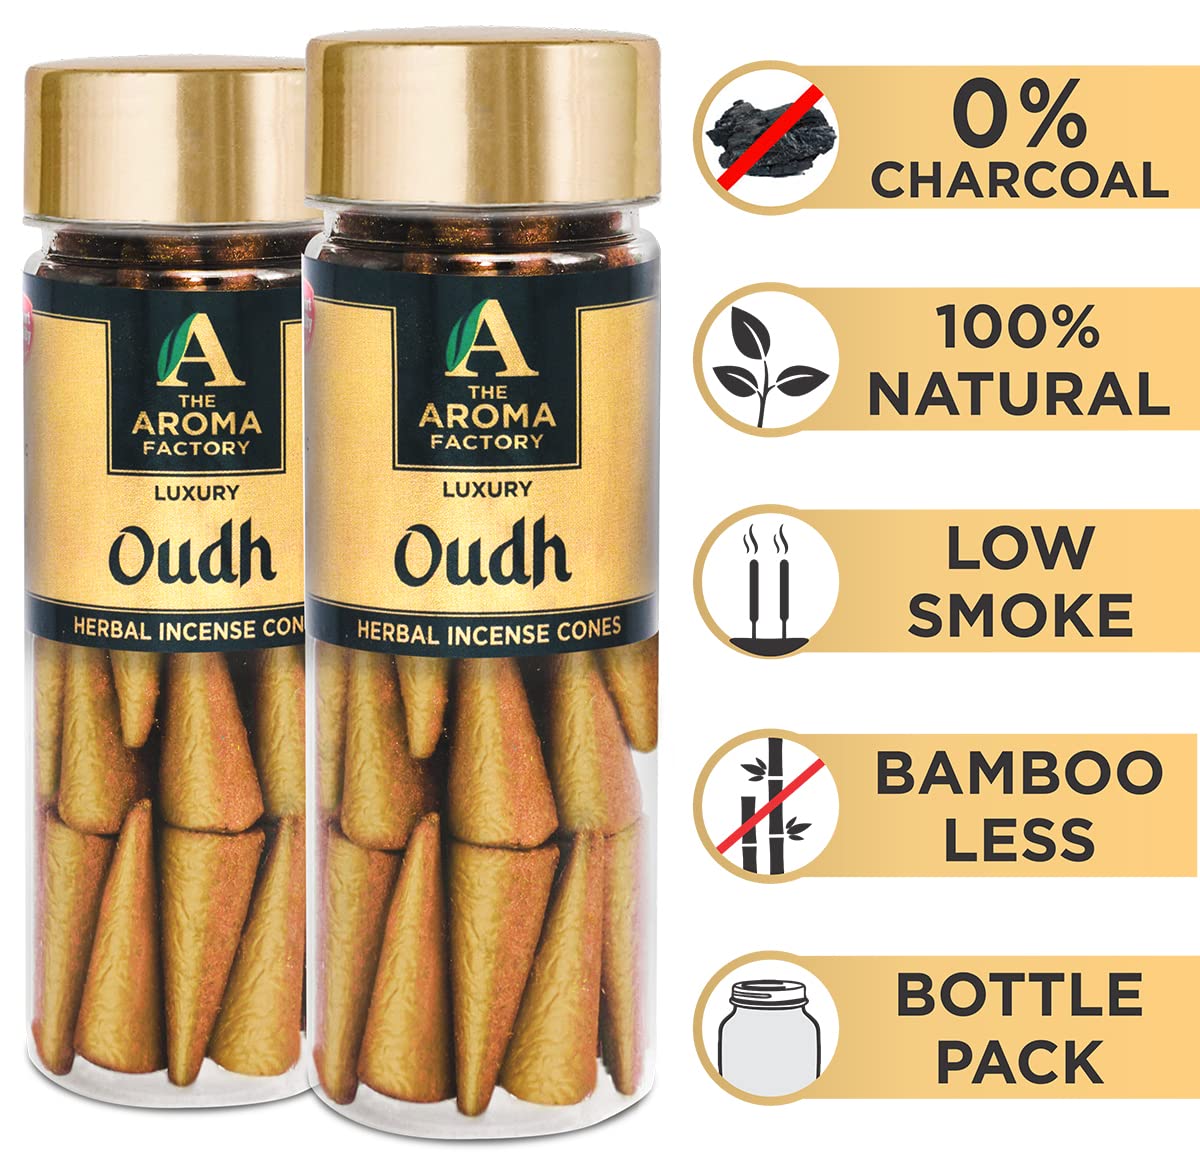 The Aroma Factory Incense Dhoop Cone for Puja, Oudh (100% Herbal & 0% Charcoal) 2 Bottles x 30 Cones